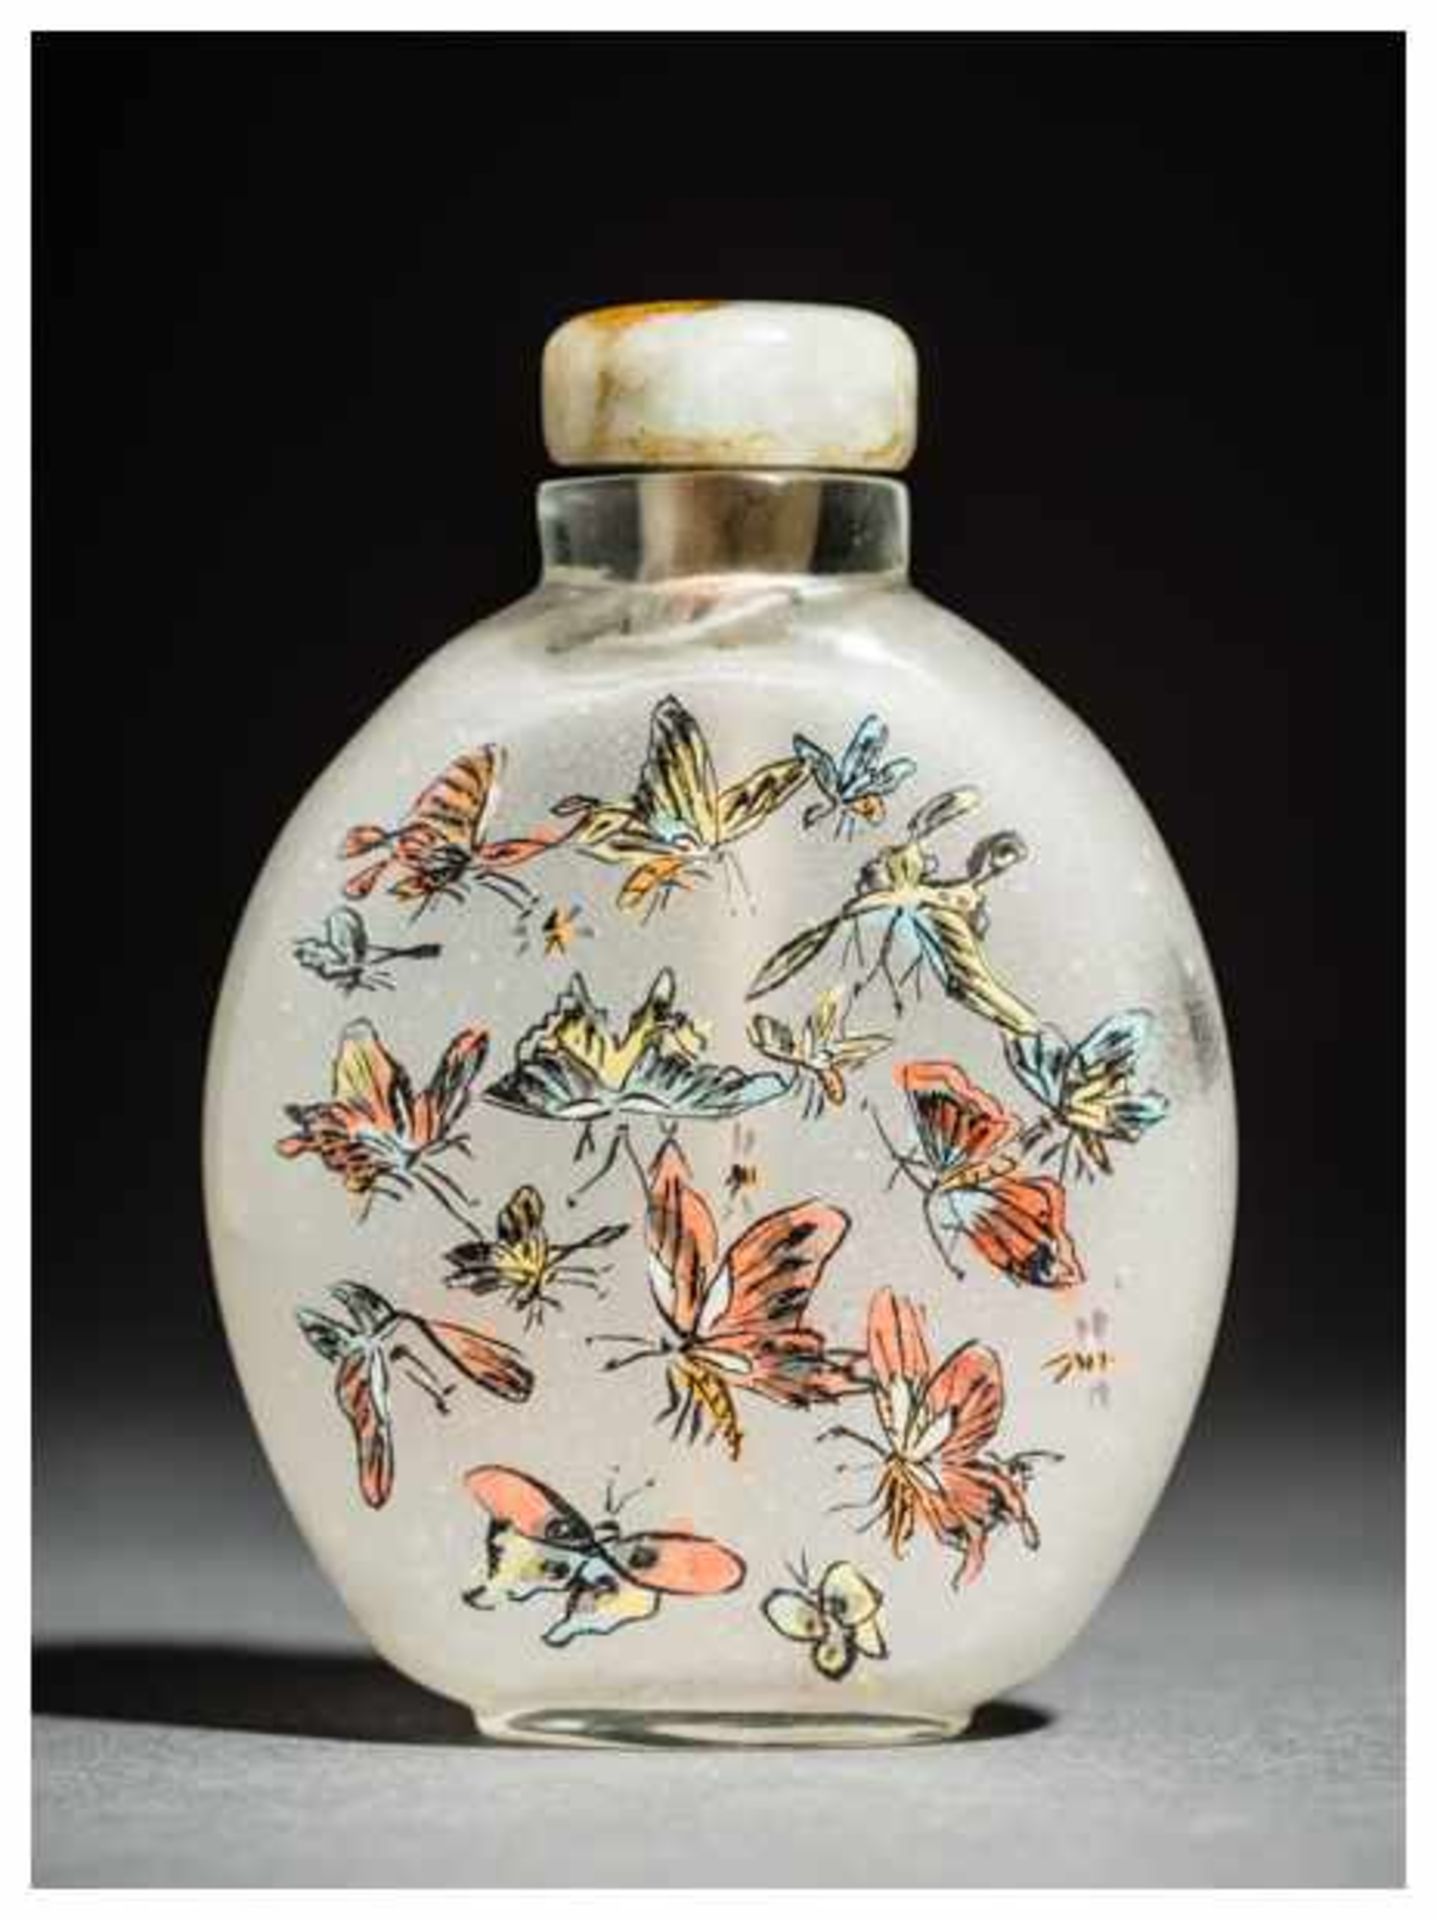 INSIDE PAINTED SNUFF BOTTLE WITH BUTTERFLIES Glass and paint. China, 20th centuryFlat, oval form